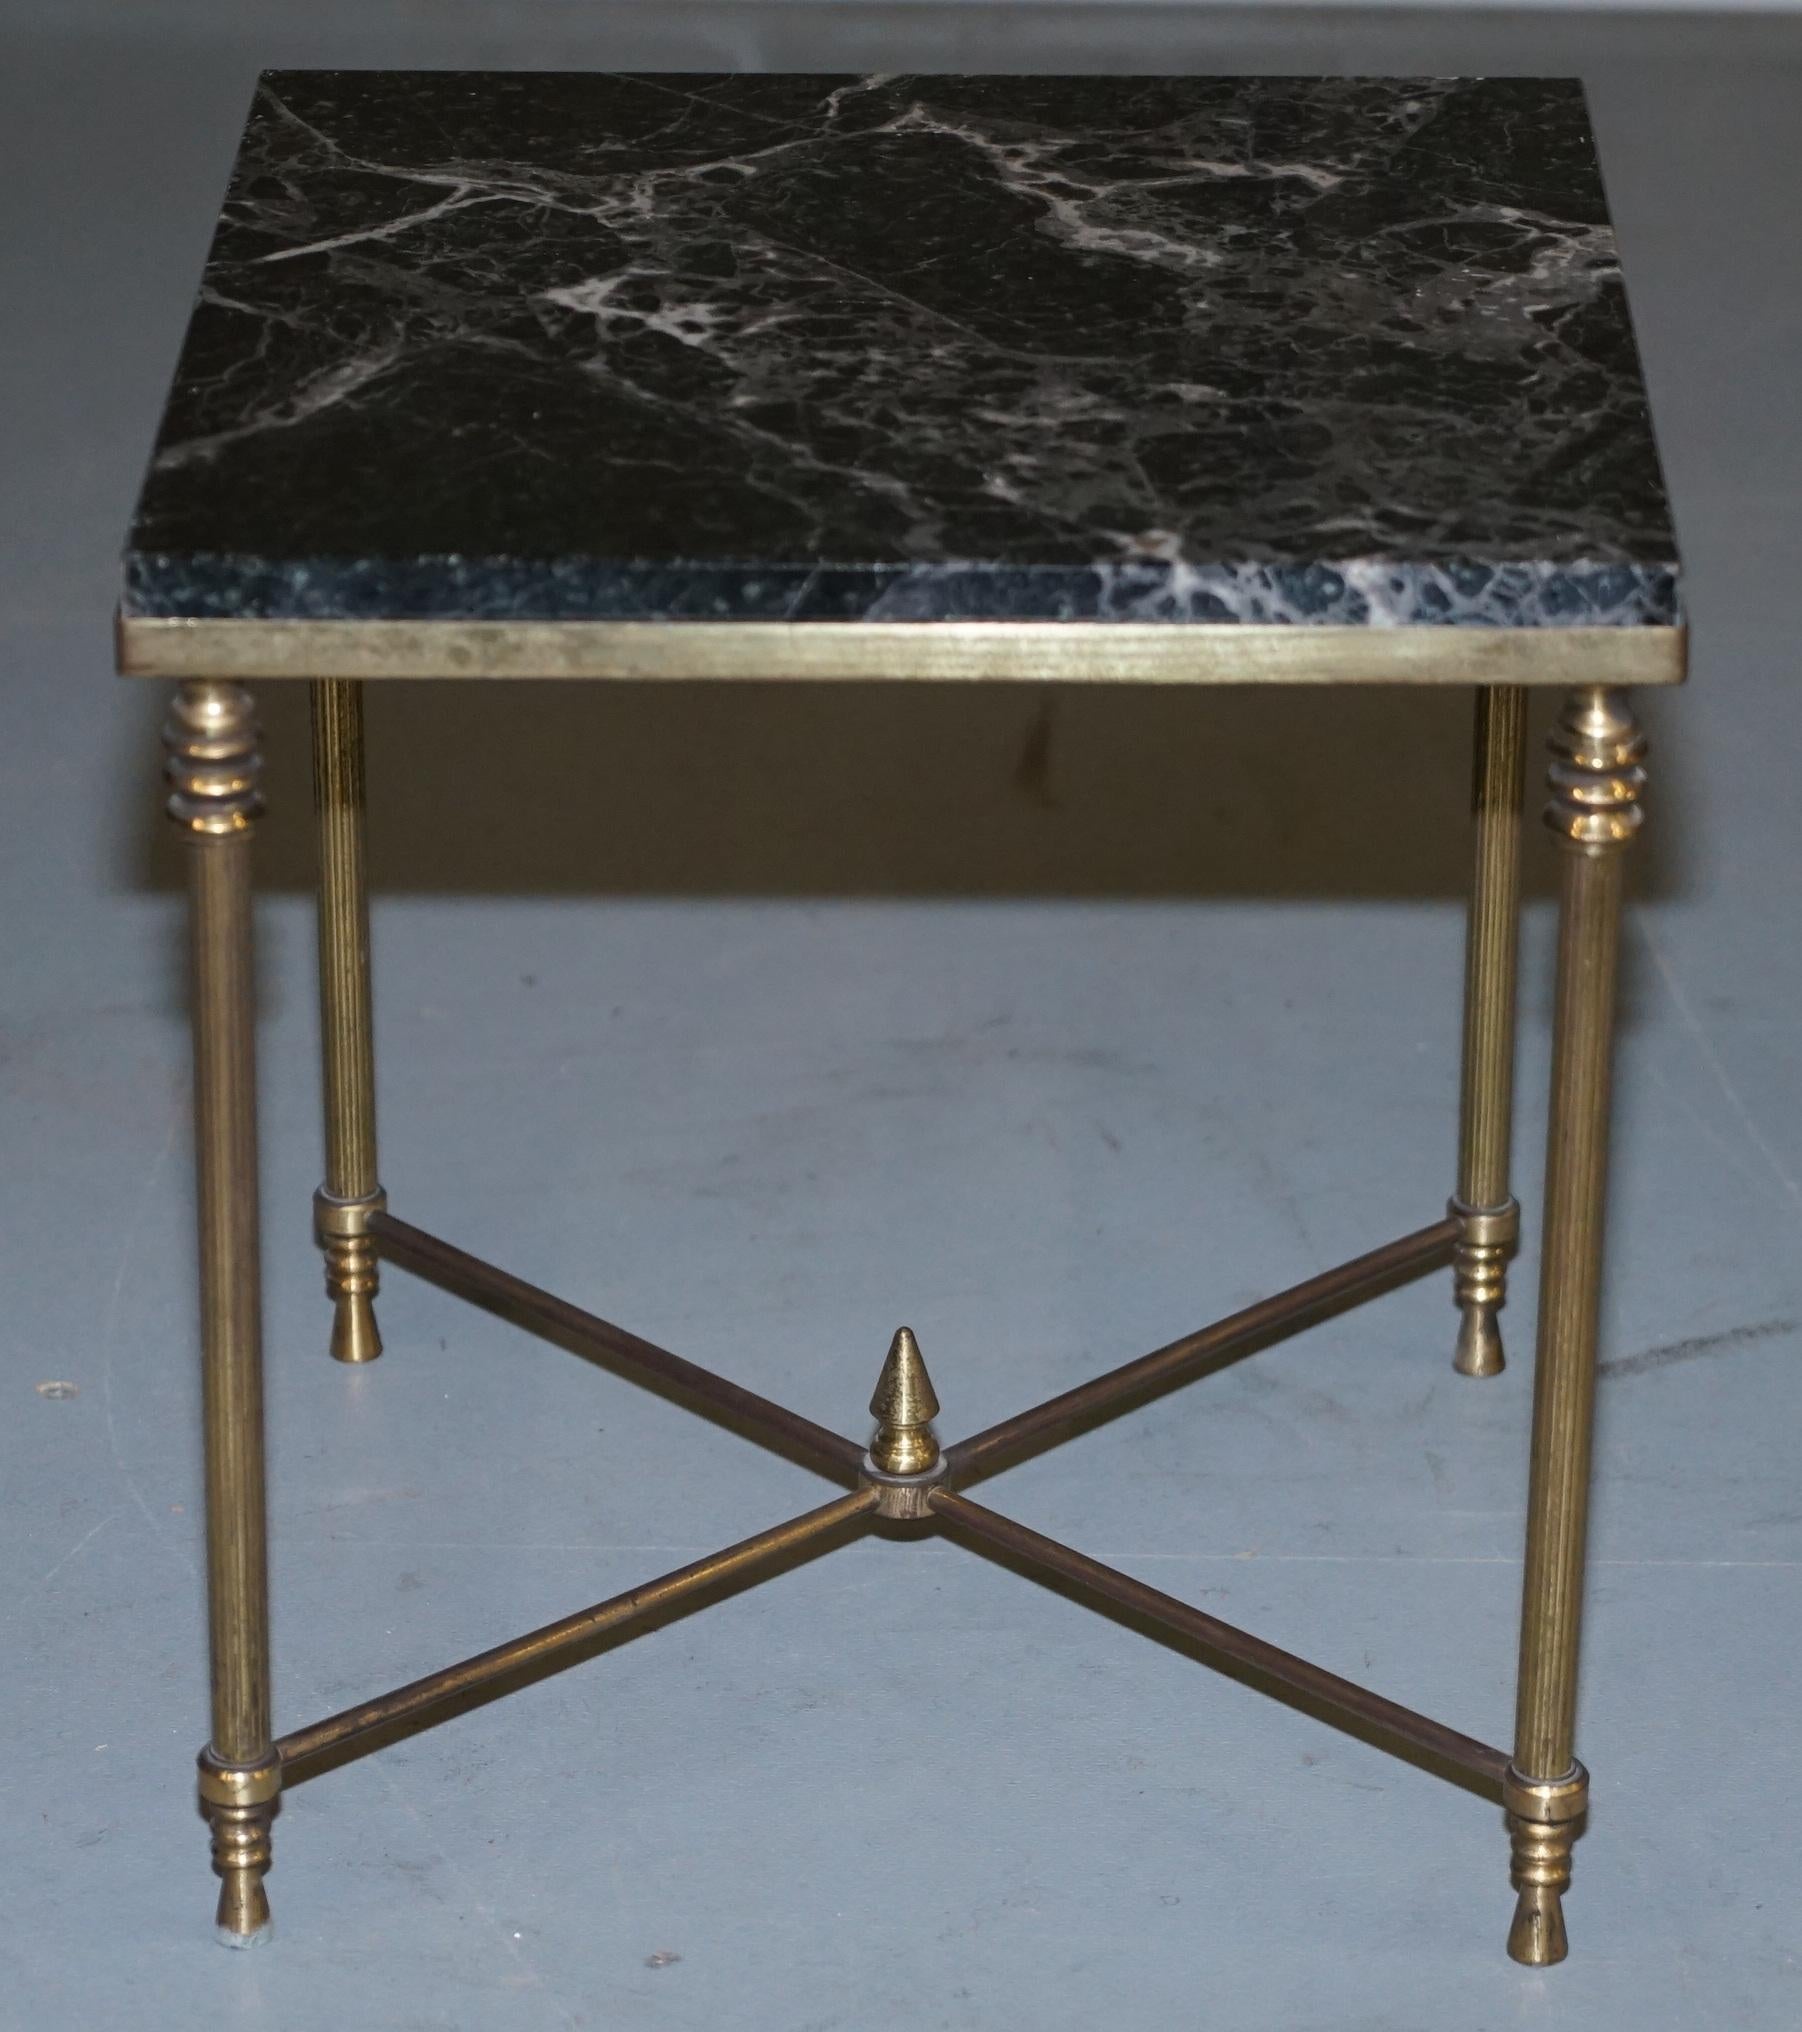 Vintage Italian Nest of Three Tables circa 1940s Brass with Thick Marble Top 14